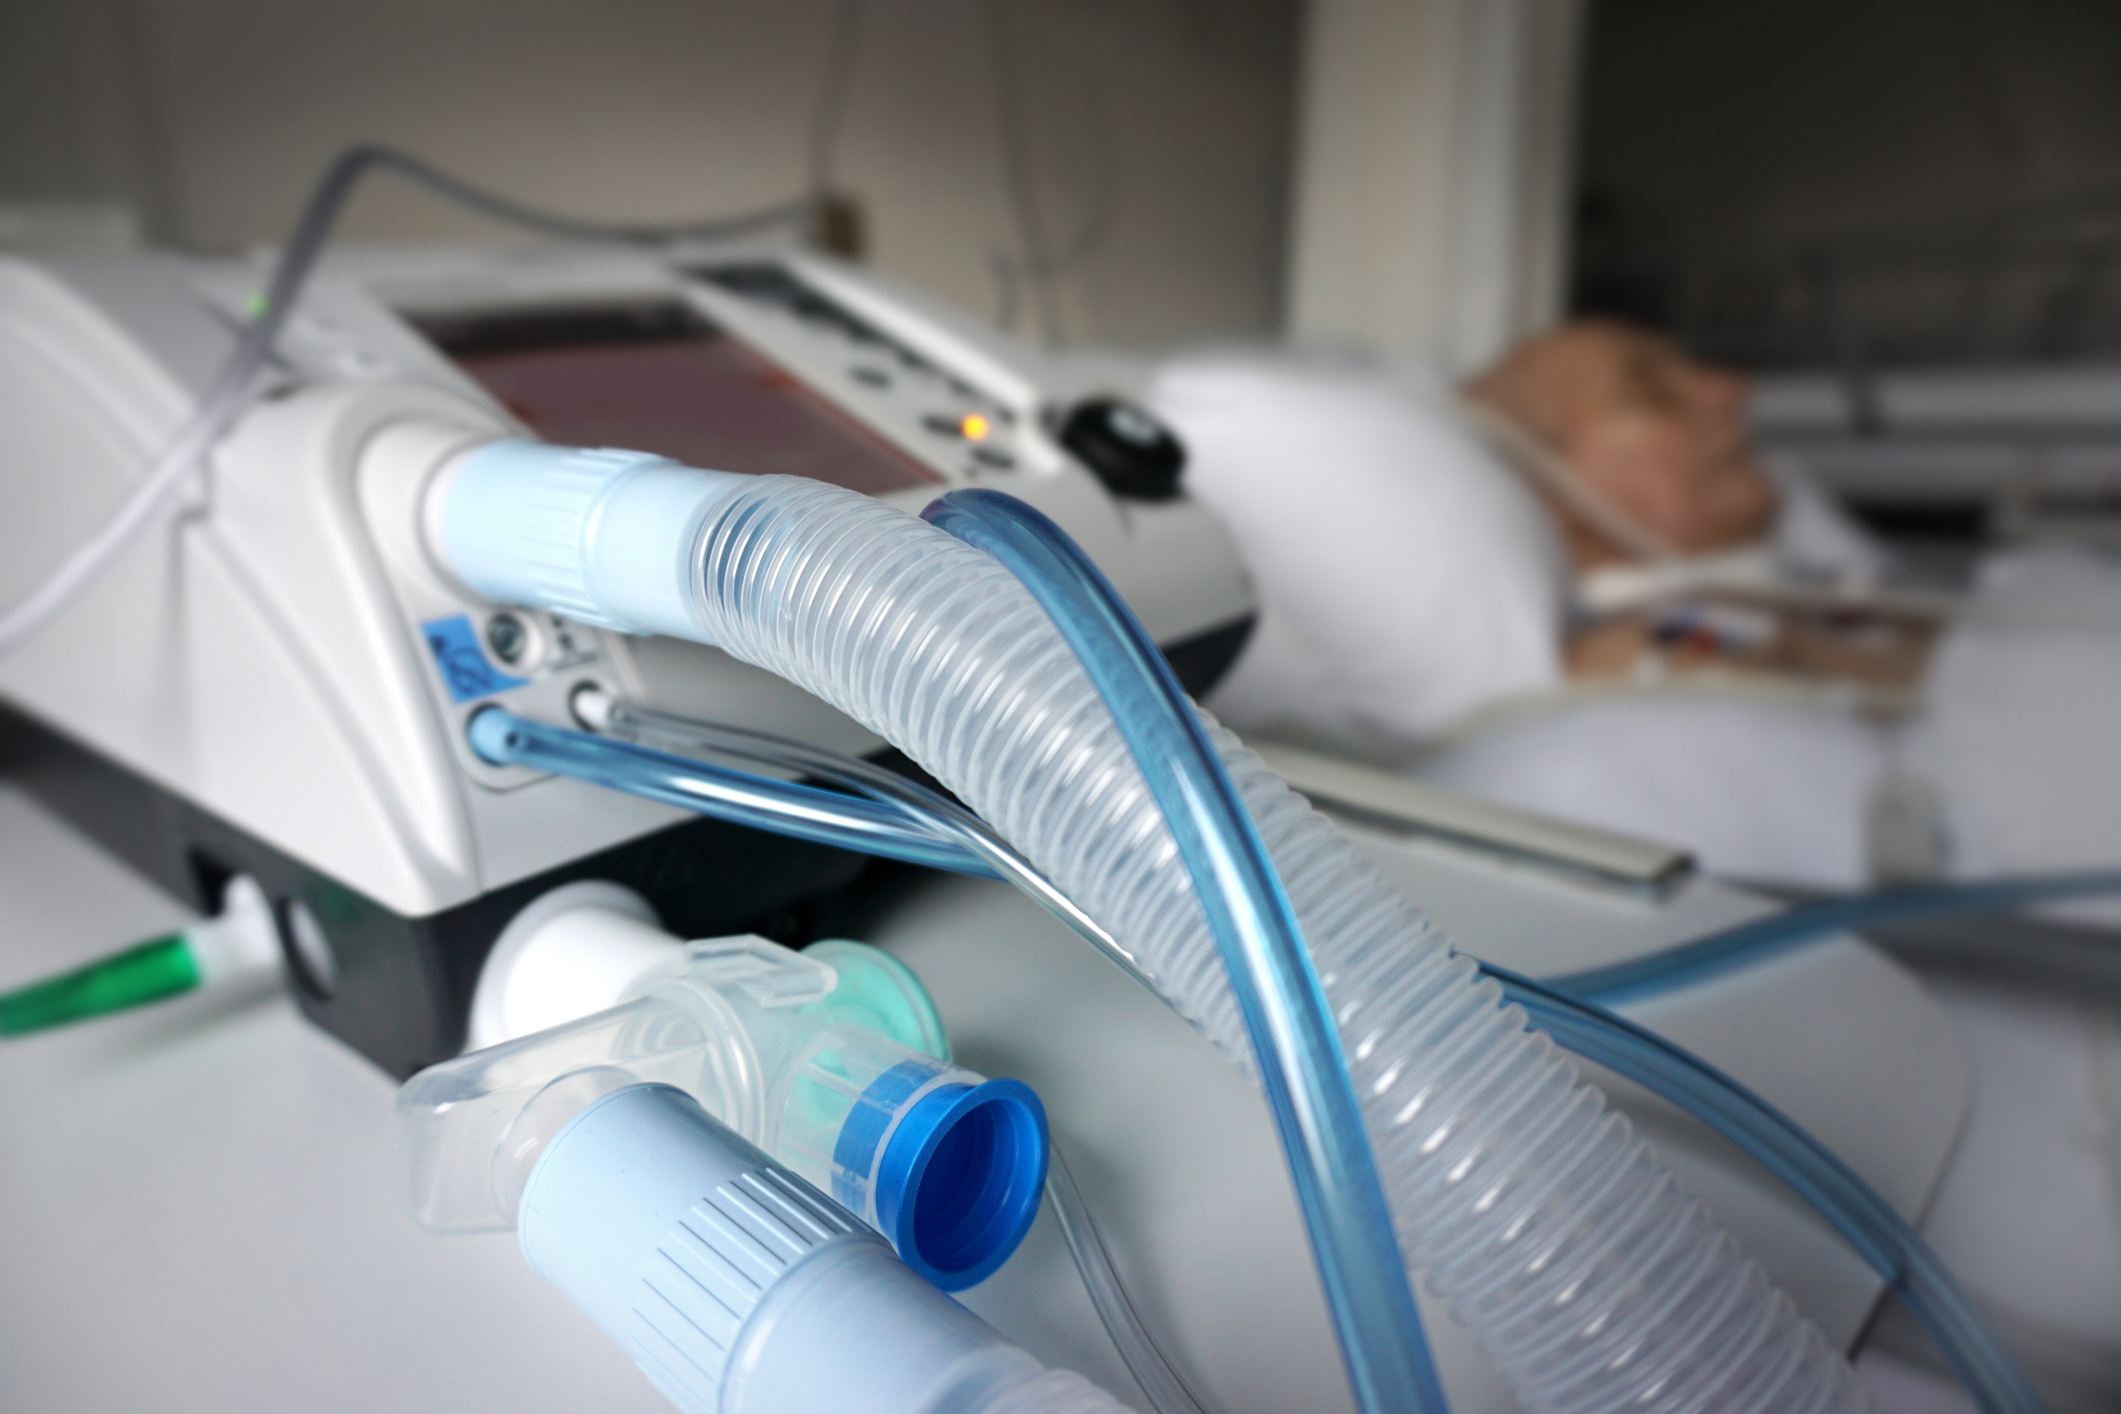 Heat and Moisture Exchange Devices Represent a “Game Changer” in Tracheostomy